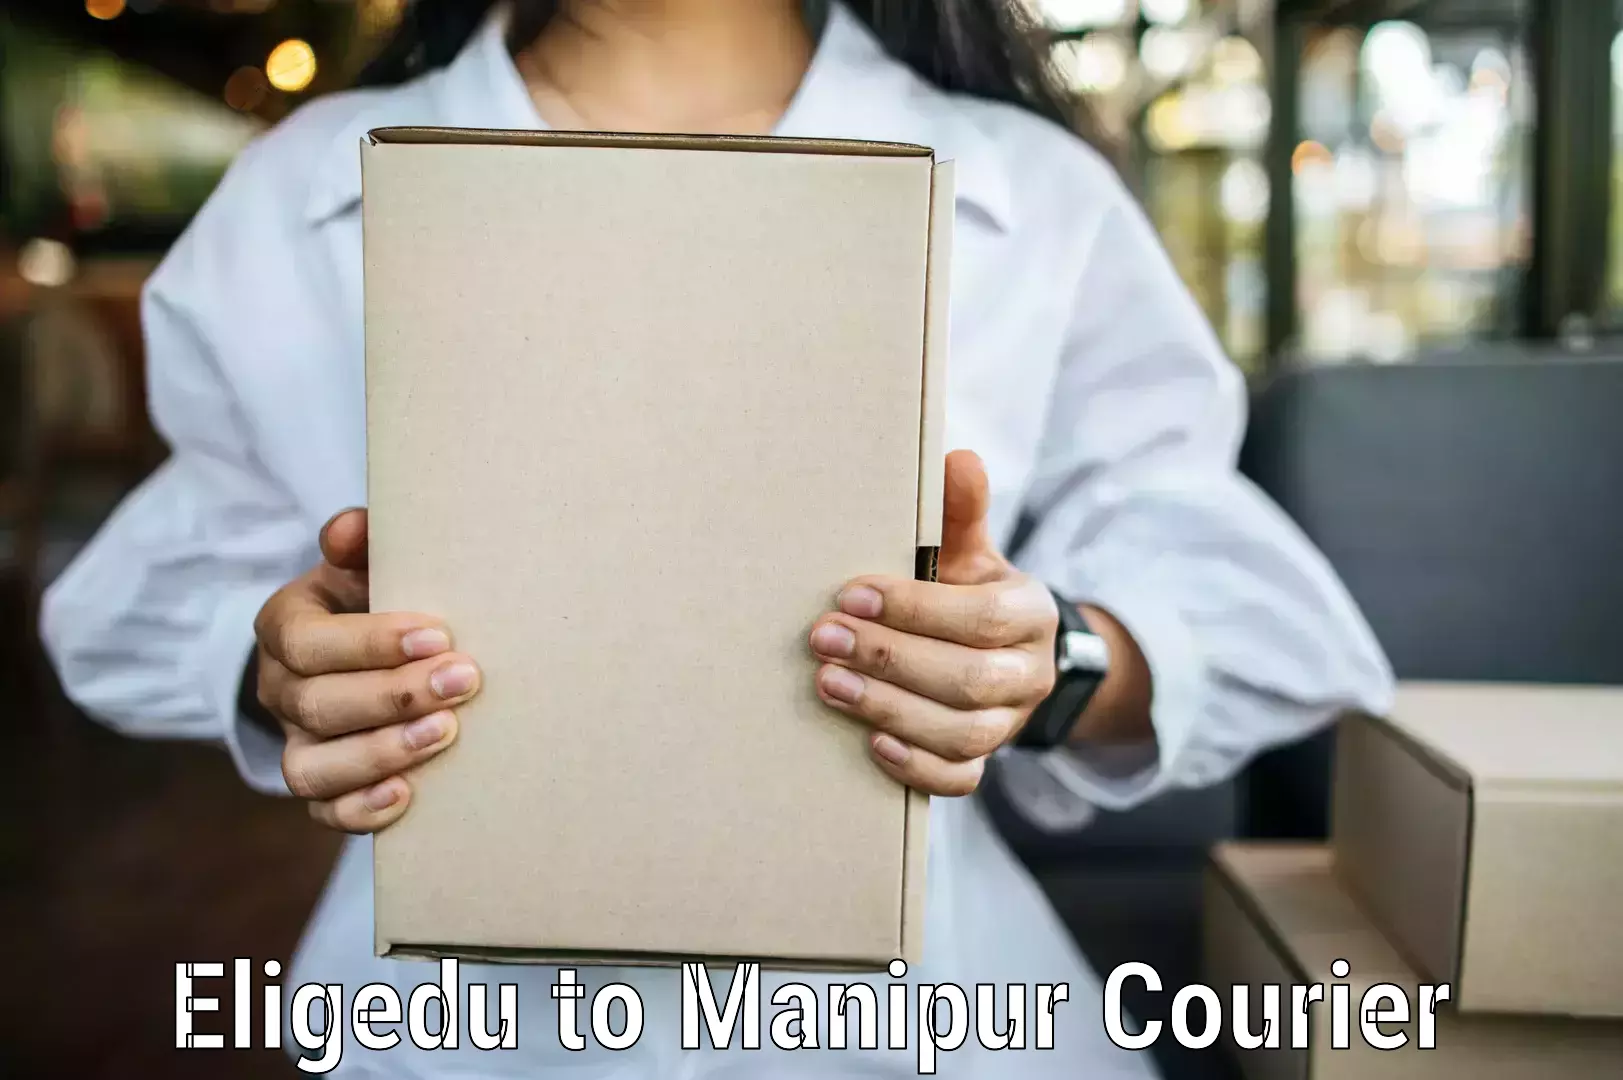 Courier services Eligedu to Manipur